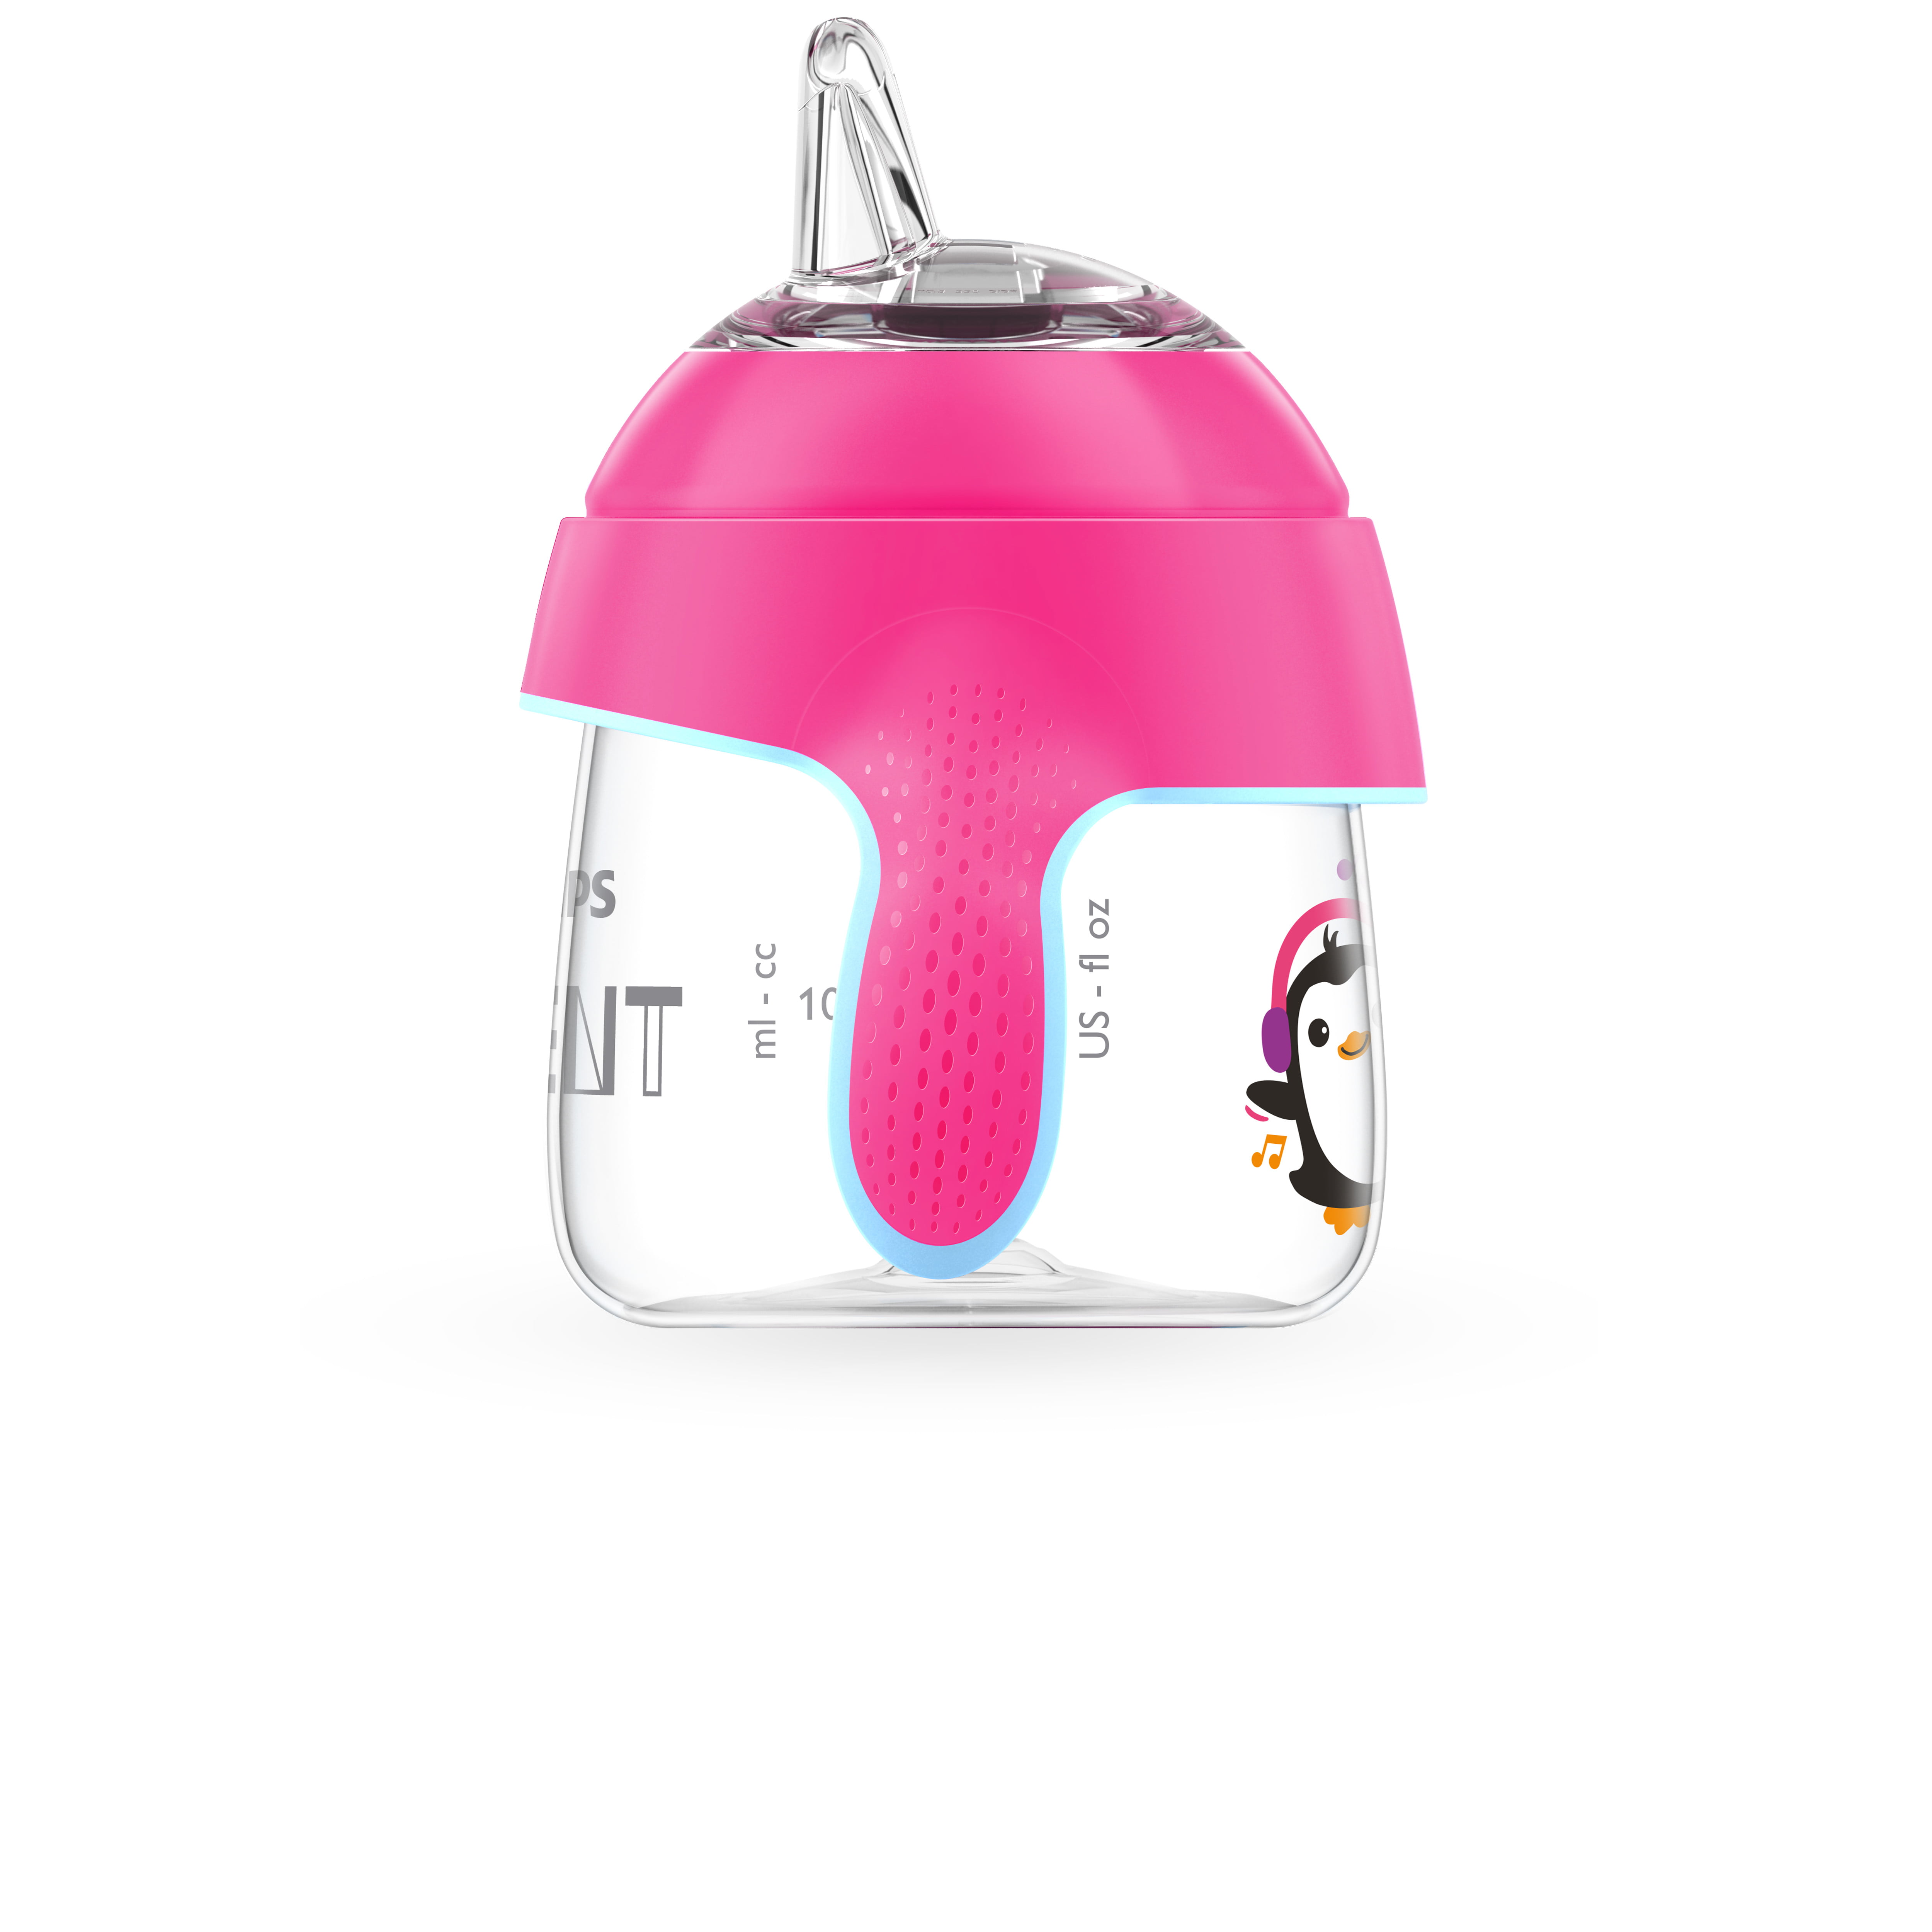 My Penguin Sippy Cup by Philips Avent